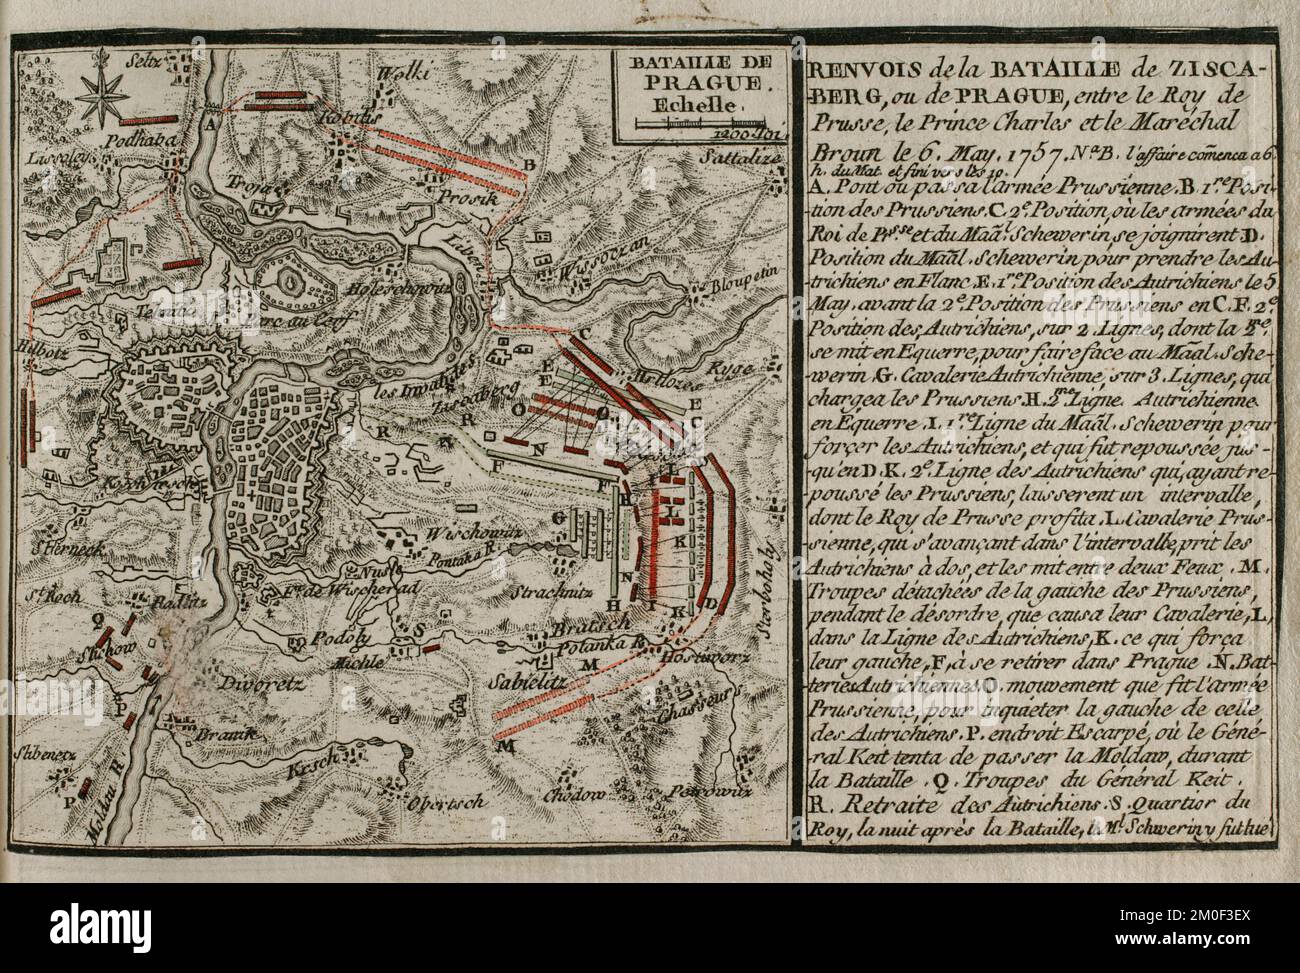 Seven Years War (1756-1763). Map of the Battle of Prague (May 6, 1757). The Prussian army of Frederick the Great defeated an army of the Holy Roman Empire, led by Charles of Lorraine. Published in 1765 by the cartographer Jean de Beaurain (1696-1771) as an illustration of his Great Map of Germany, with the events that took place during the Seven Years War. Etching and engraving. French edition, 1765. Military Historical Library of Barcelona (Biblioteca Histórico Militar de Barcelona). Catalonia. Spain. Stock Photo